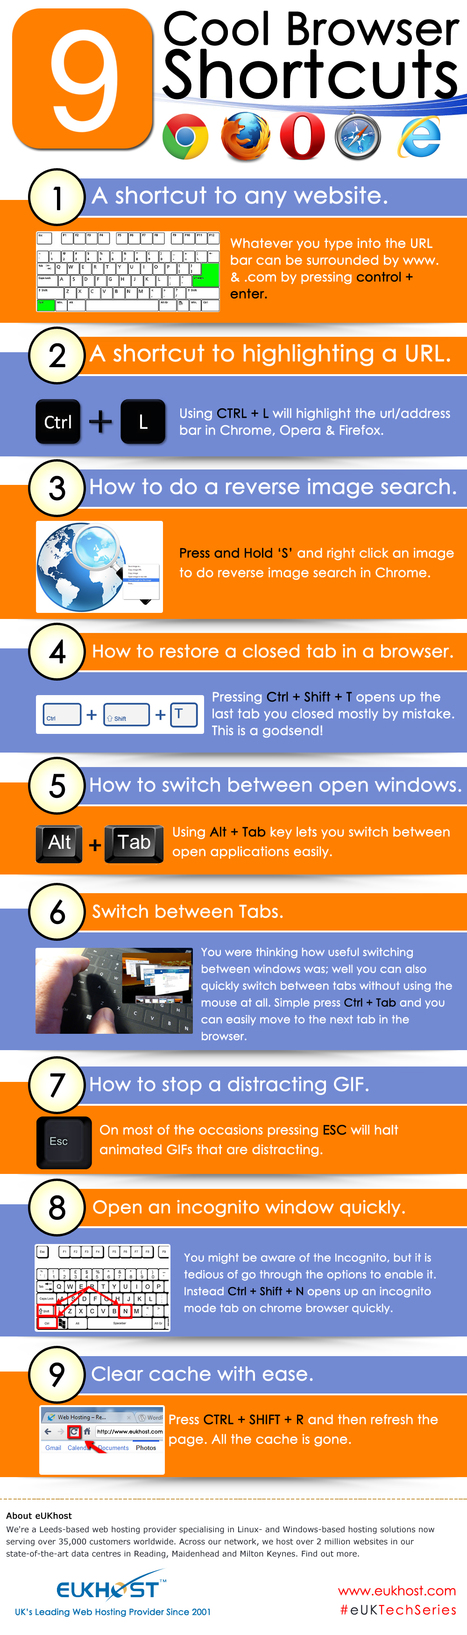 9 Cool Browser Shorcuts {Infographic} | DIGITAL LEARNING | Scoop.it